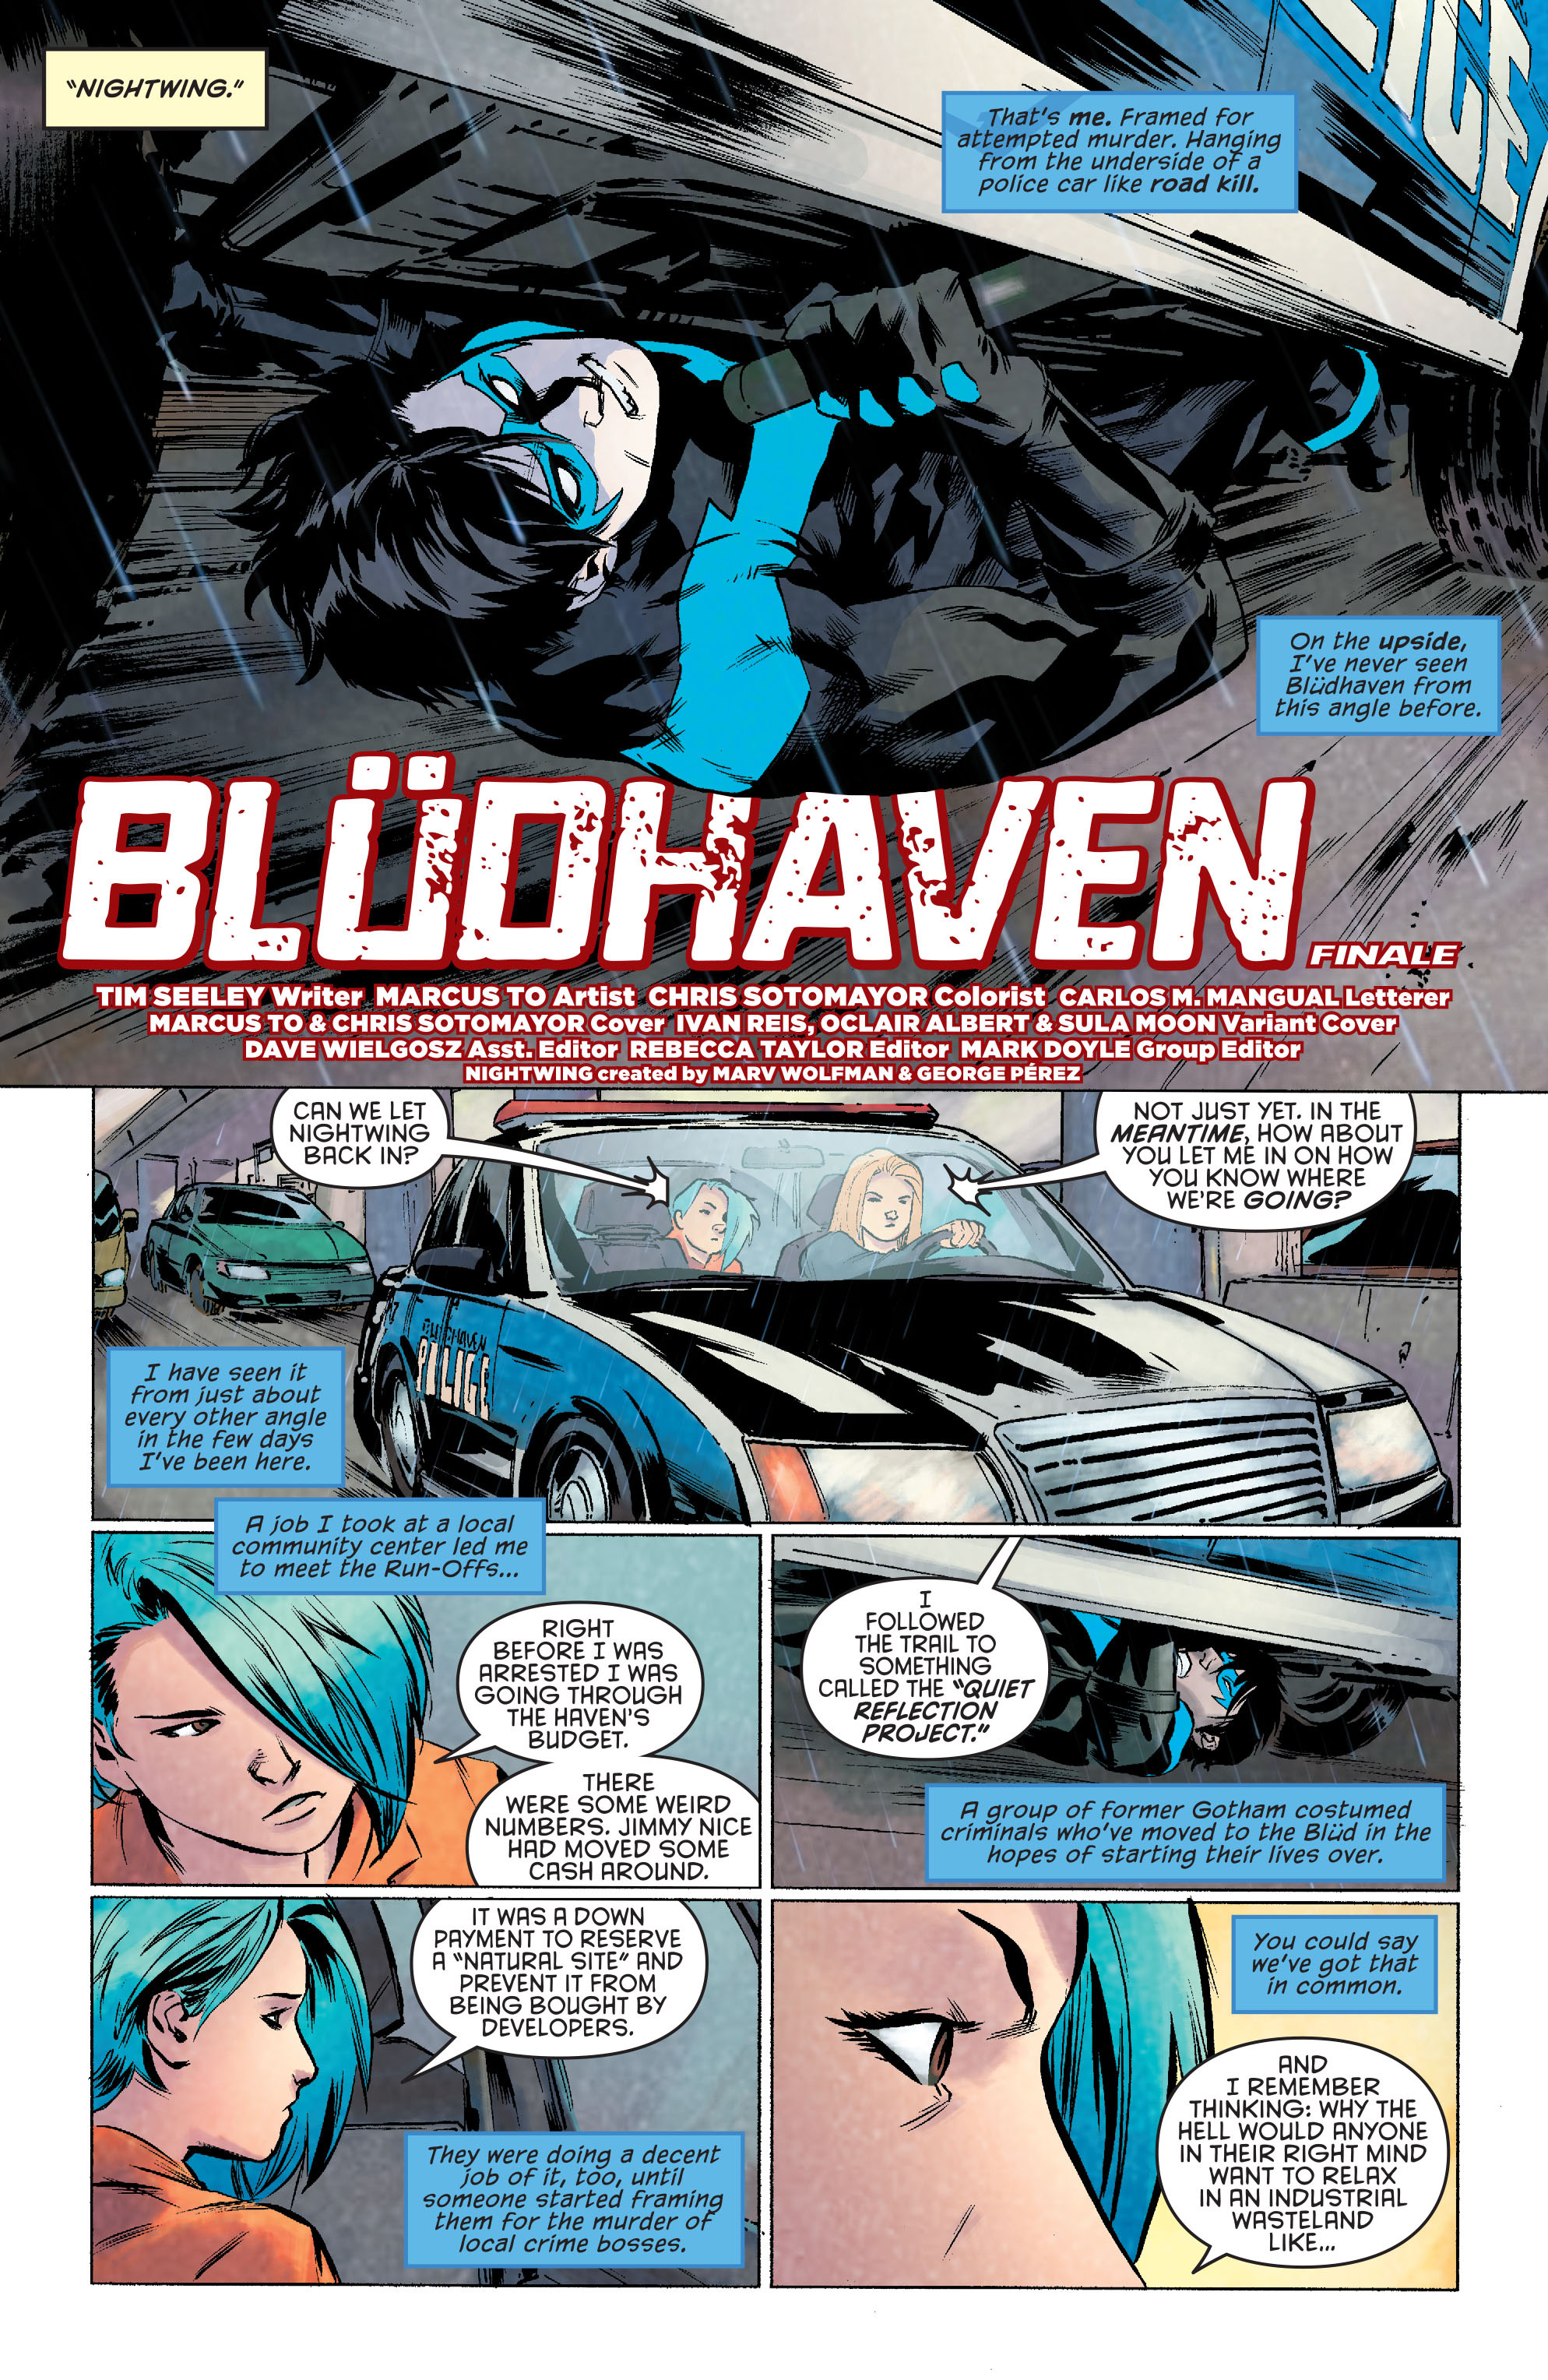 Nightwing (2016-): Chapter 14 - Page 4